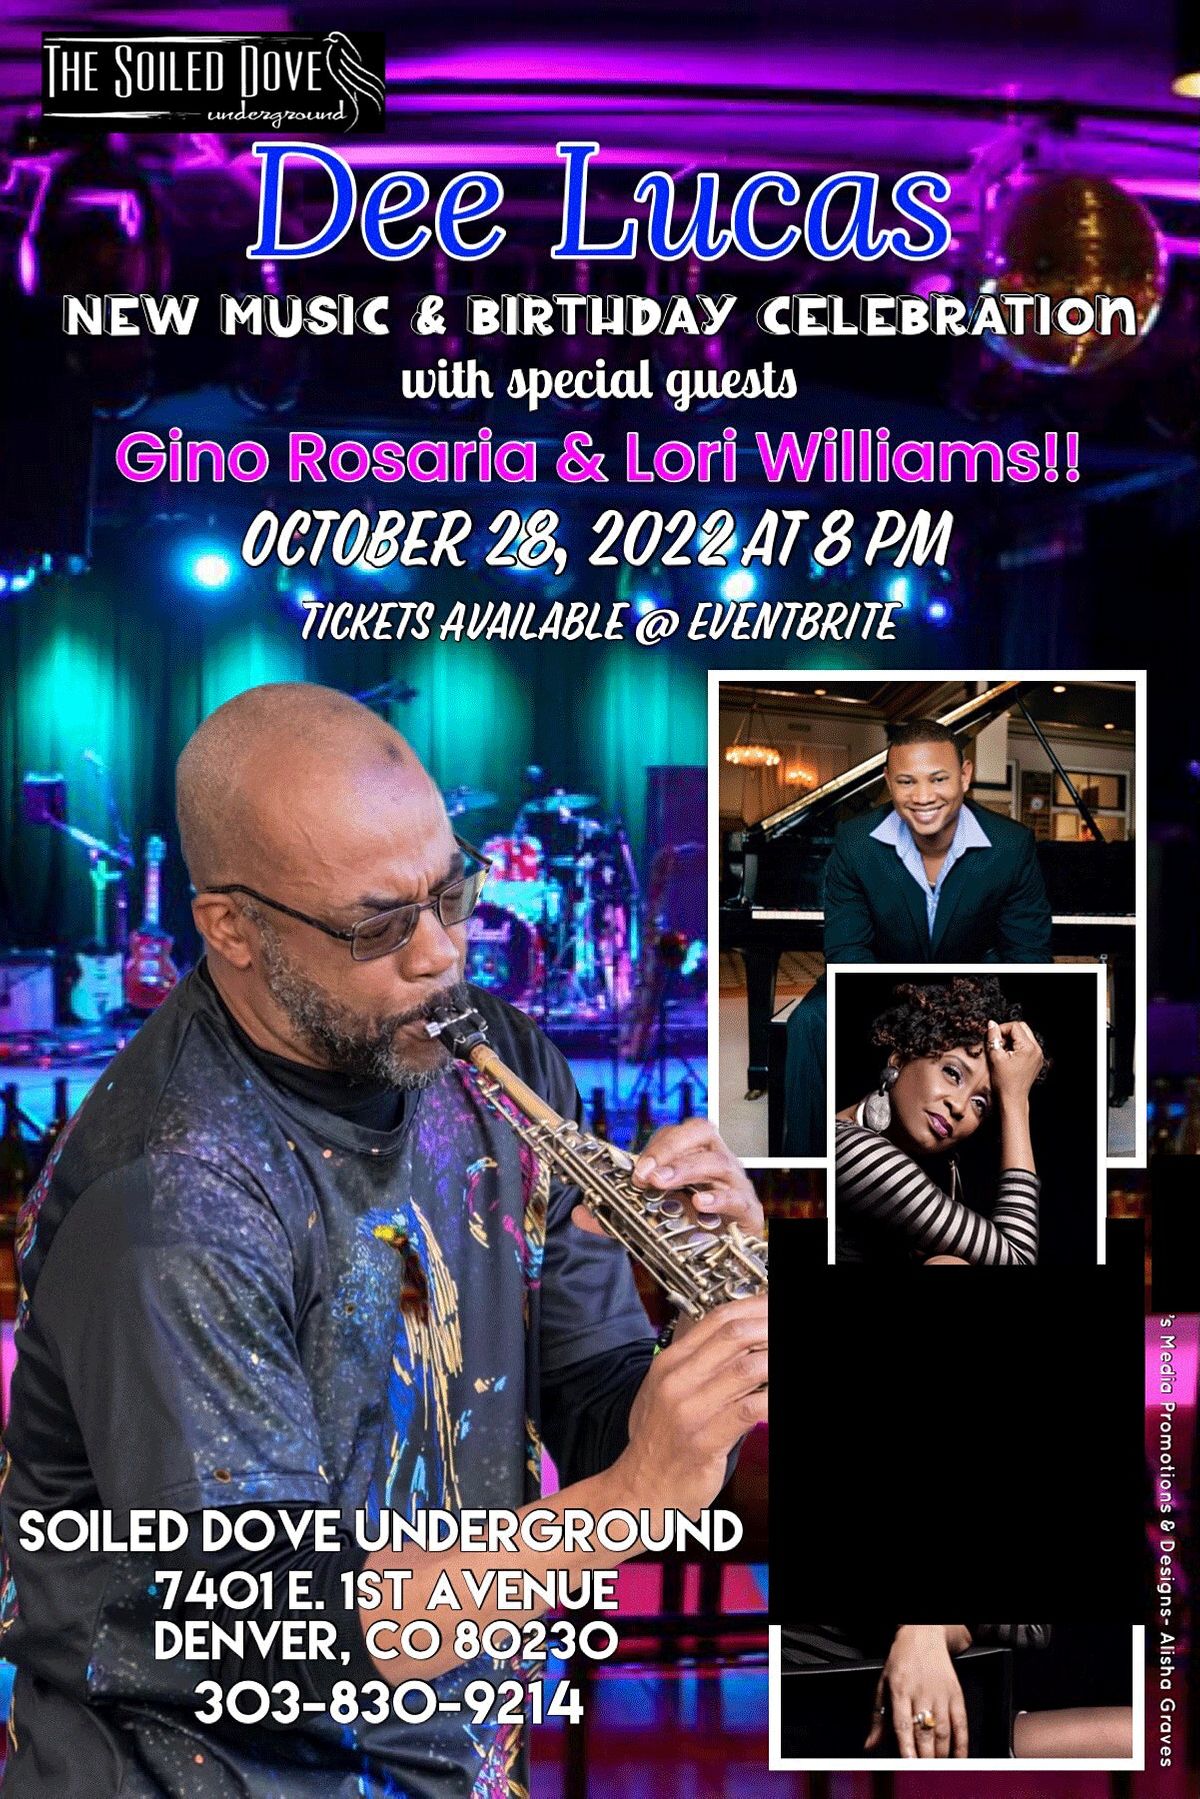 Dee Lucas with special guests Gino Rosaria & Lori Williams